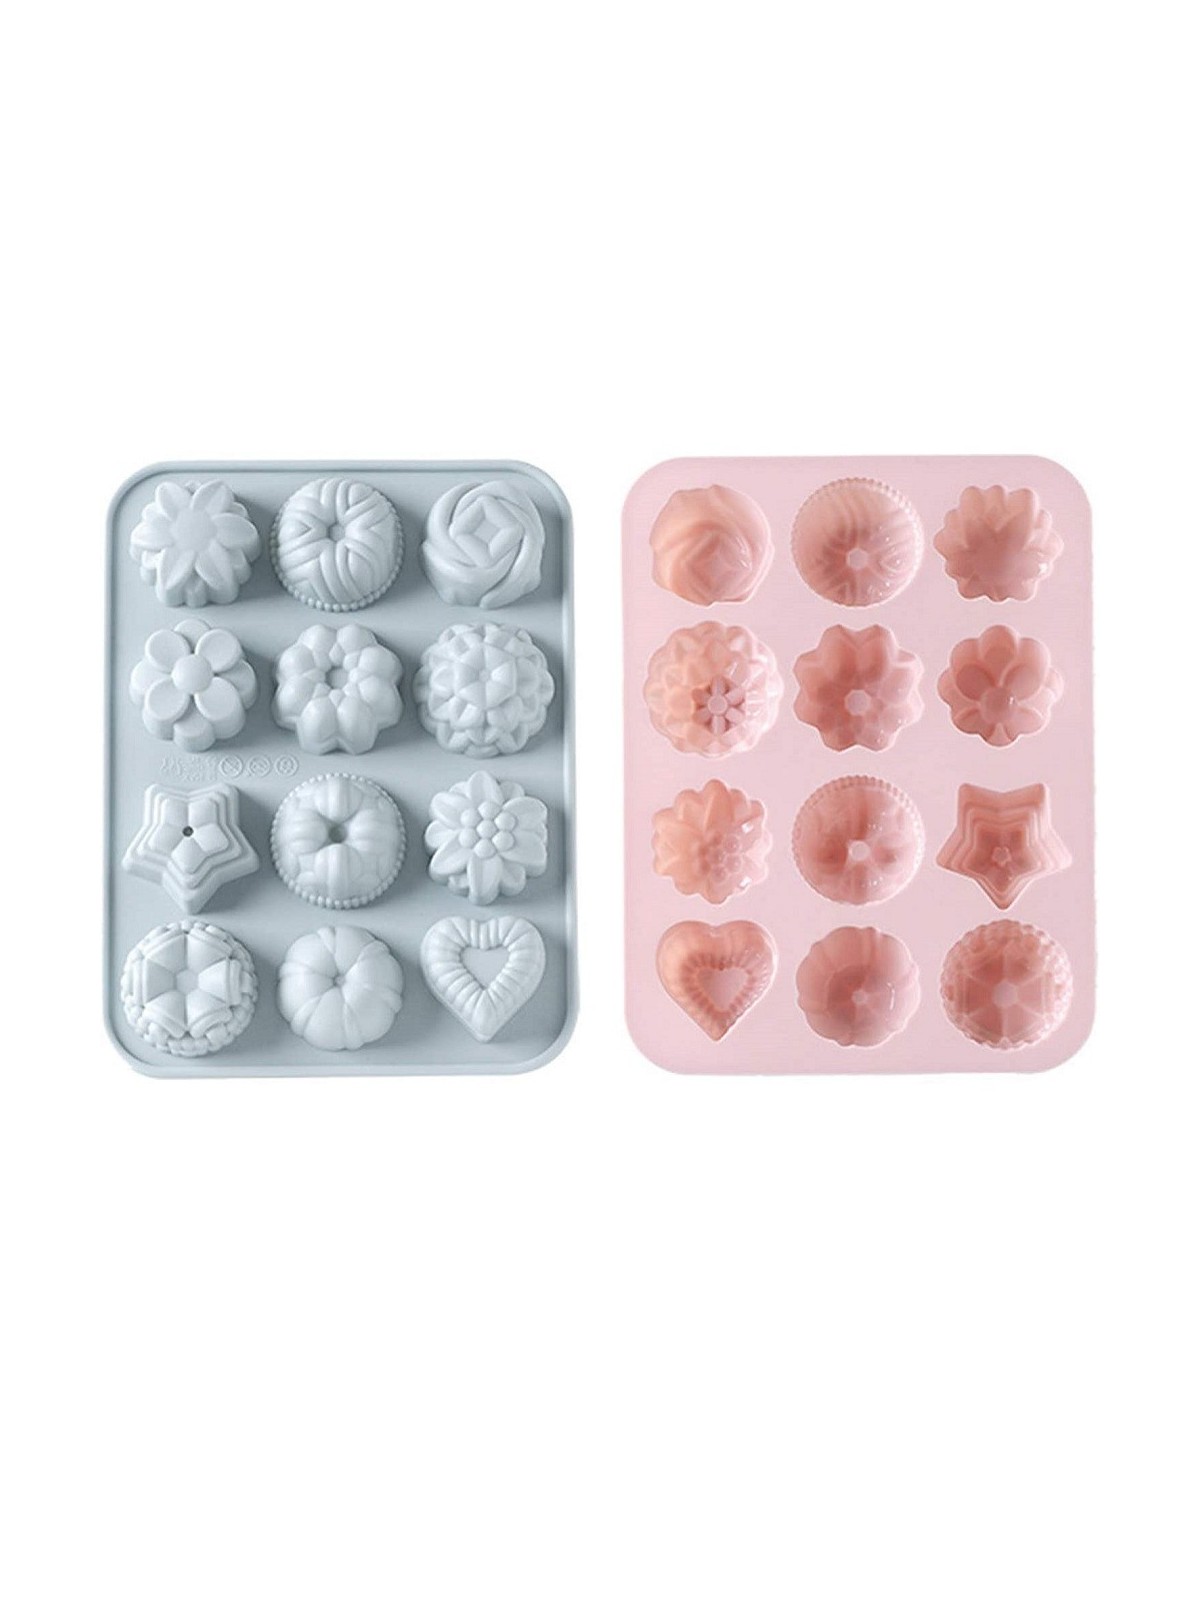 Silicone mold for cakes - mini flowers